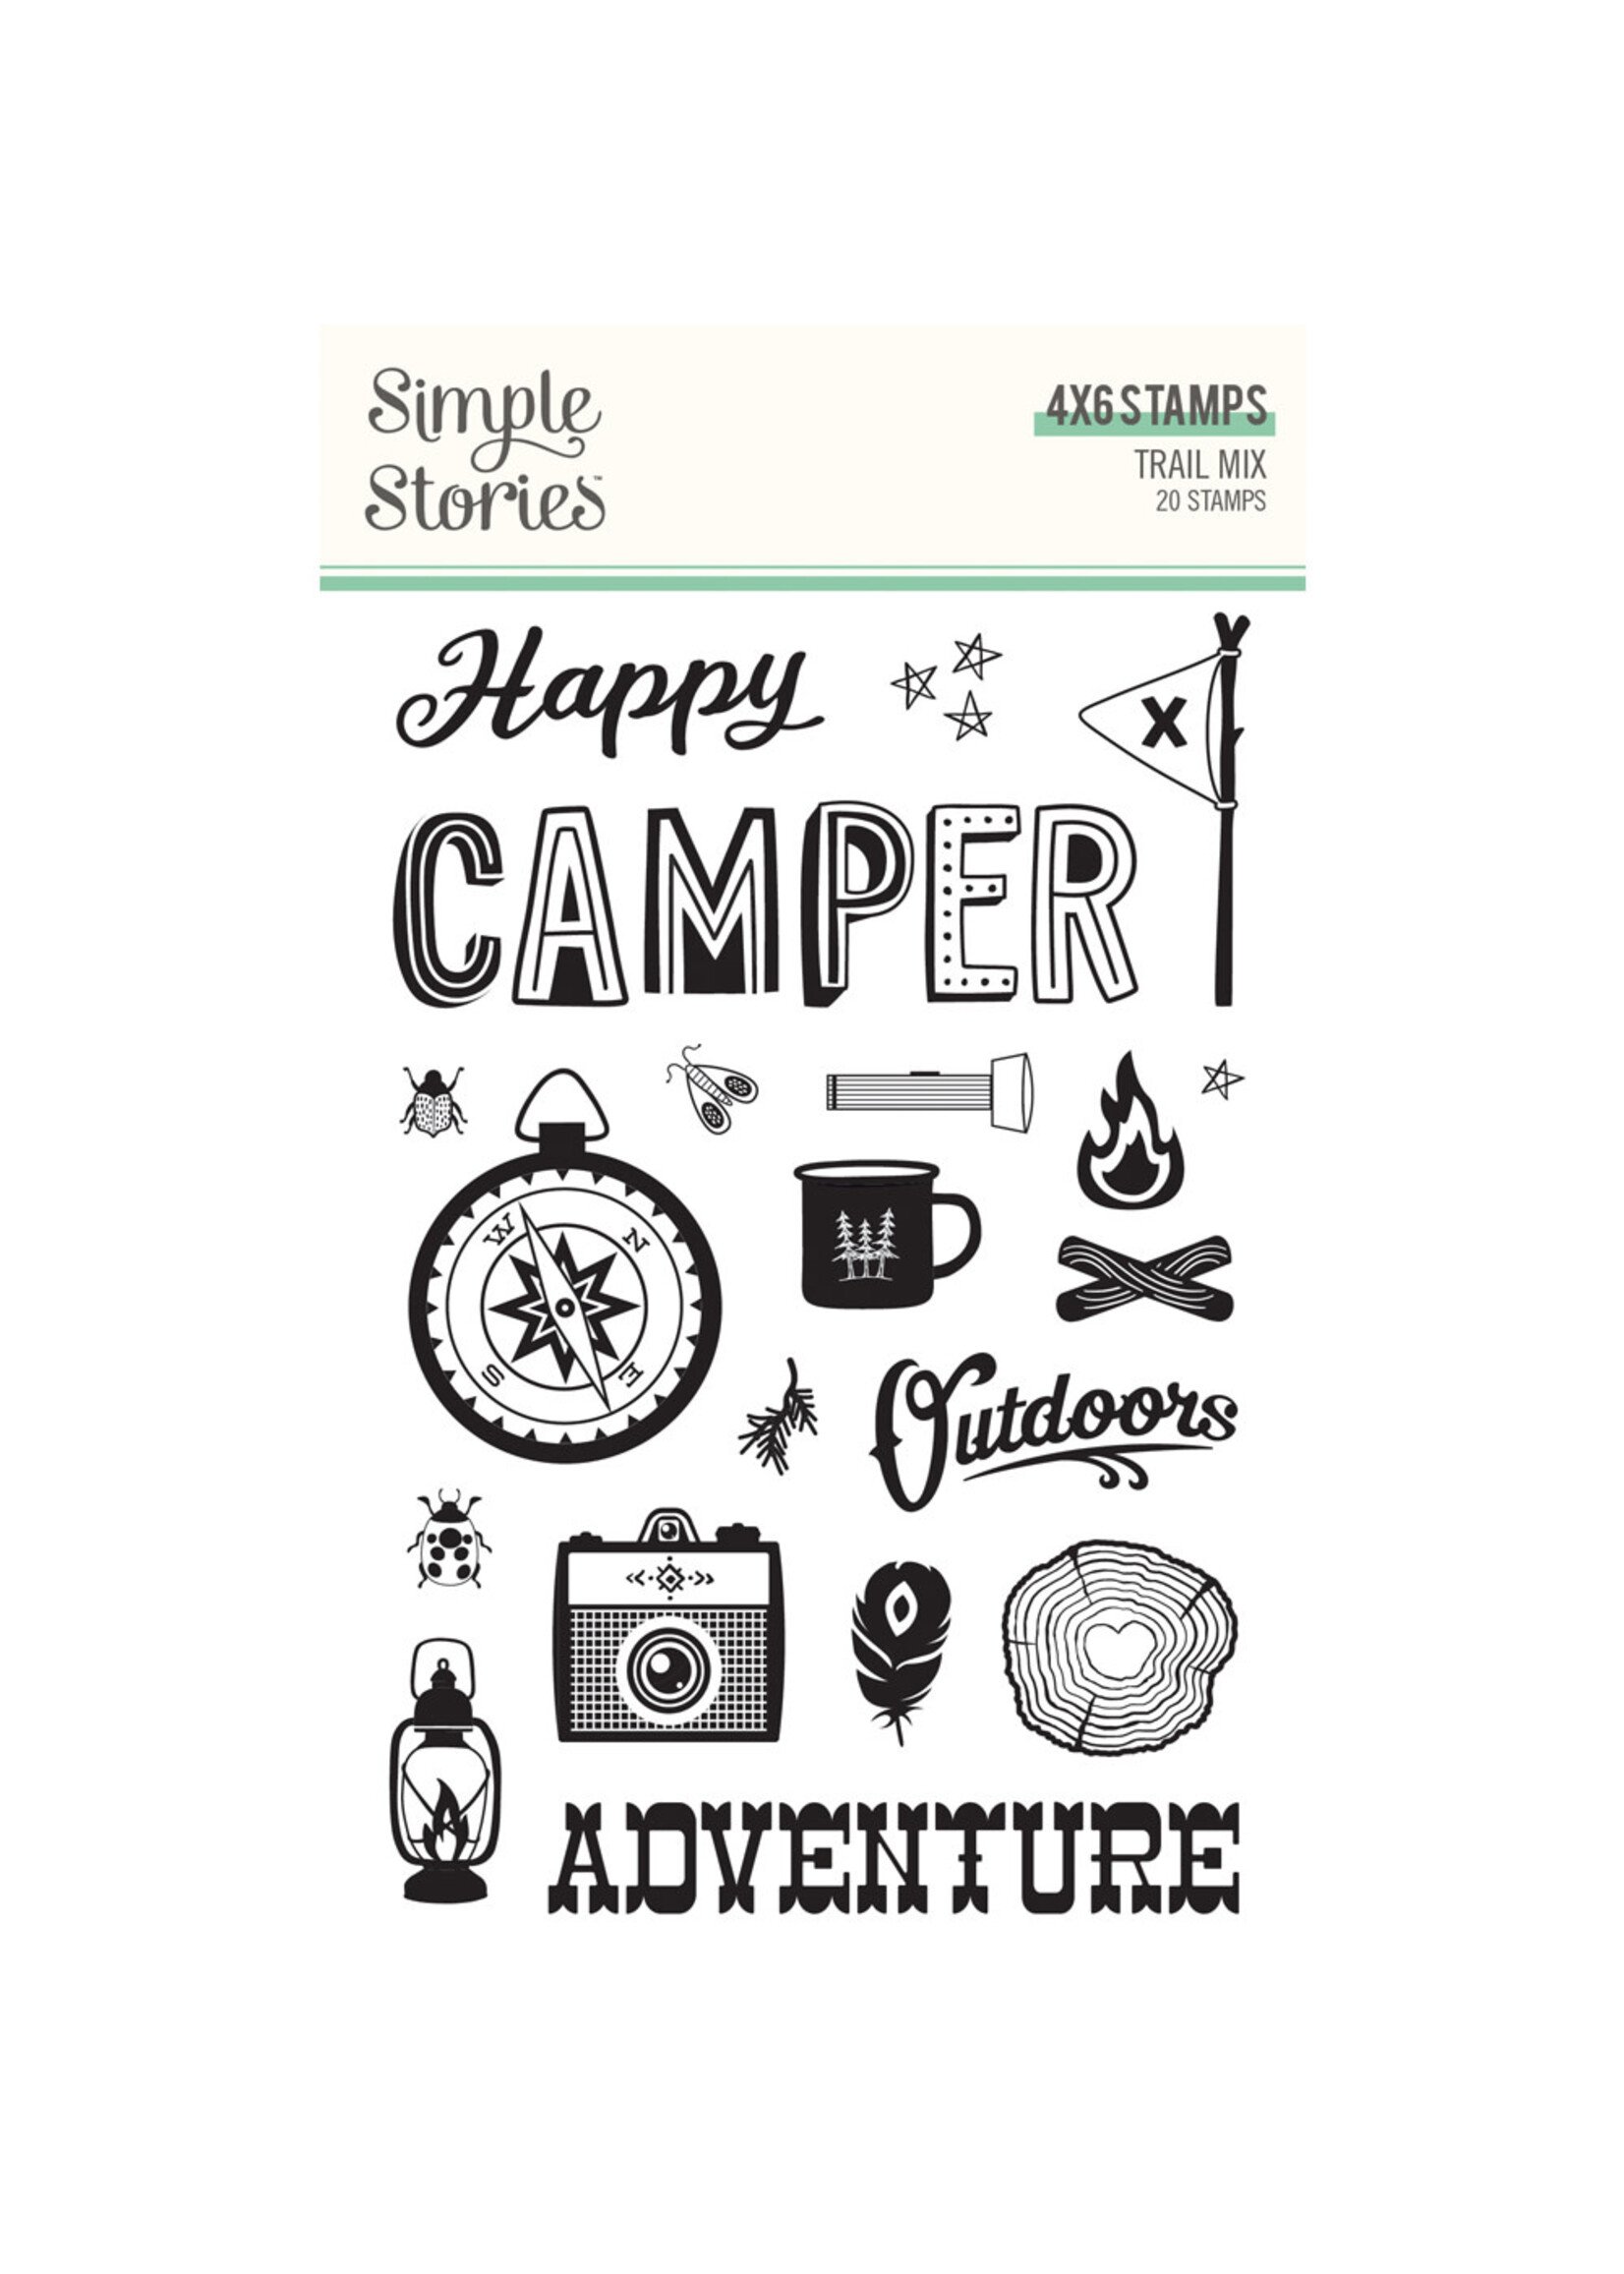 Simple Stories Trail Mix - Stamps